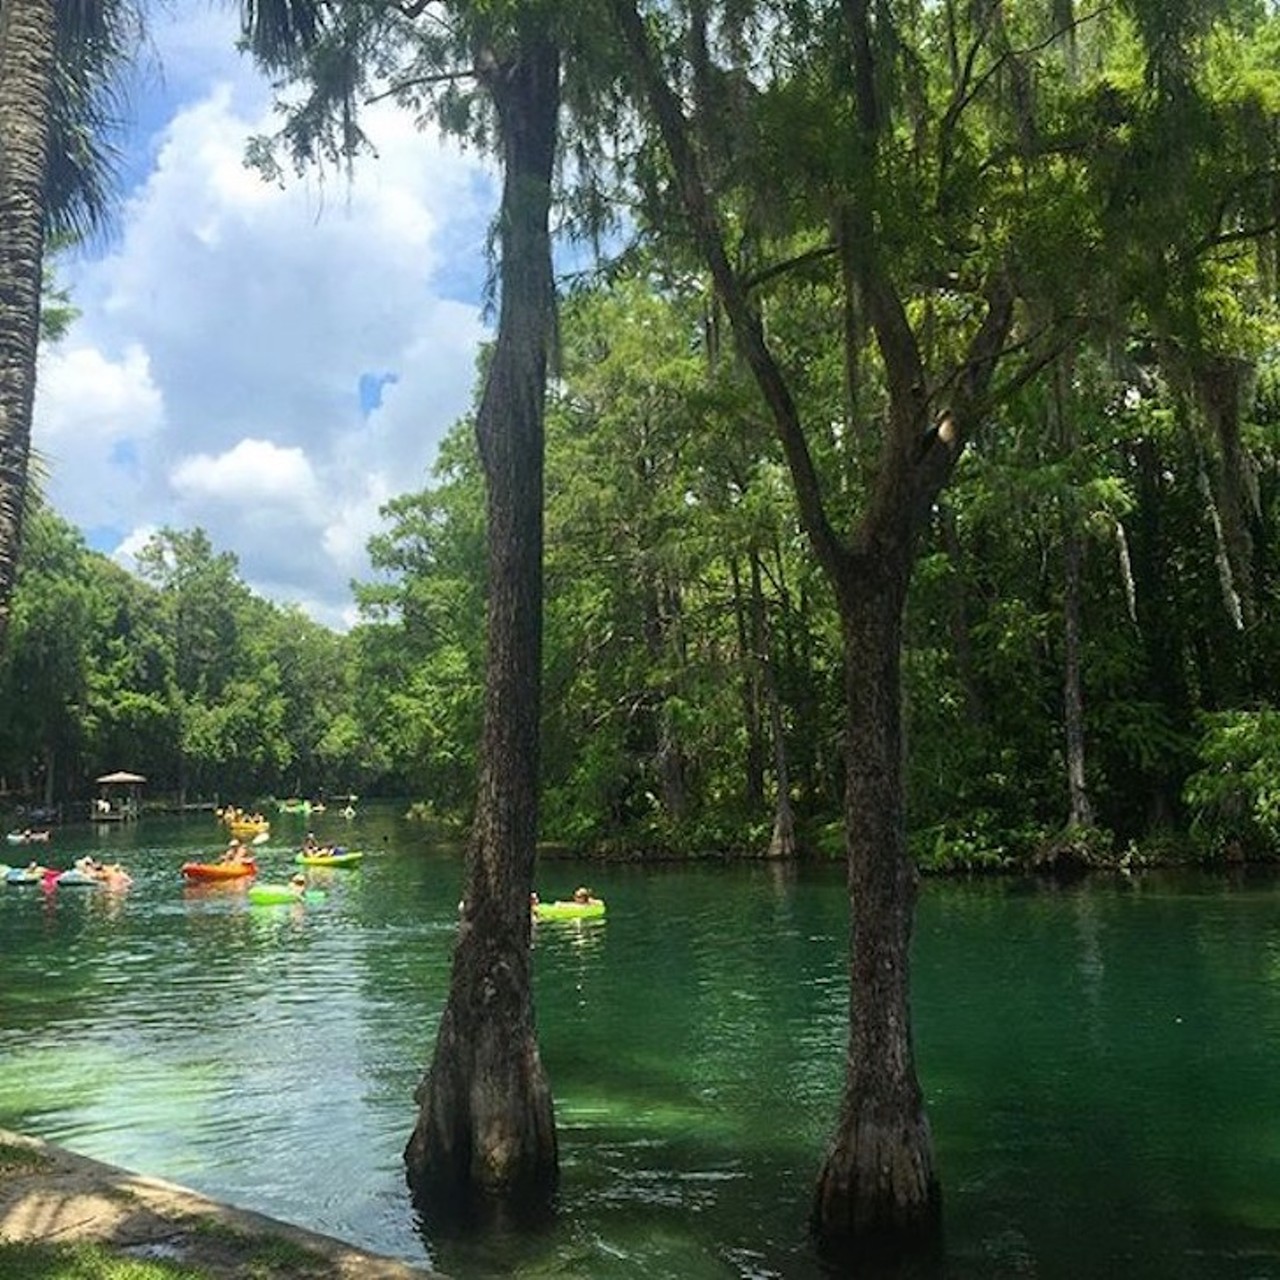 K P Hole and the Rainbow River
9435 SW 190th Ave., Dunnellon, 352-489-3055
Distance: About 1 hour and 30 minutes from Orlando
Photo via floridahikes/Instagram